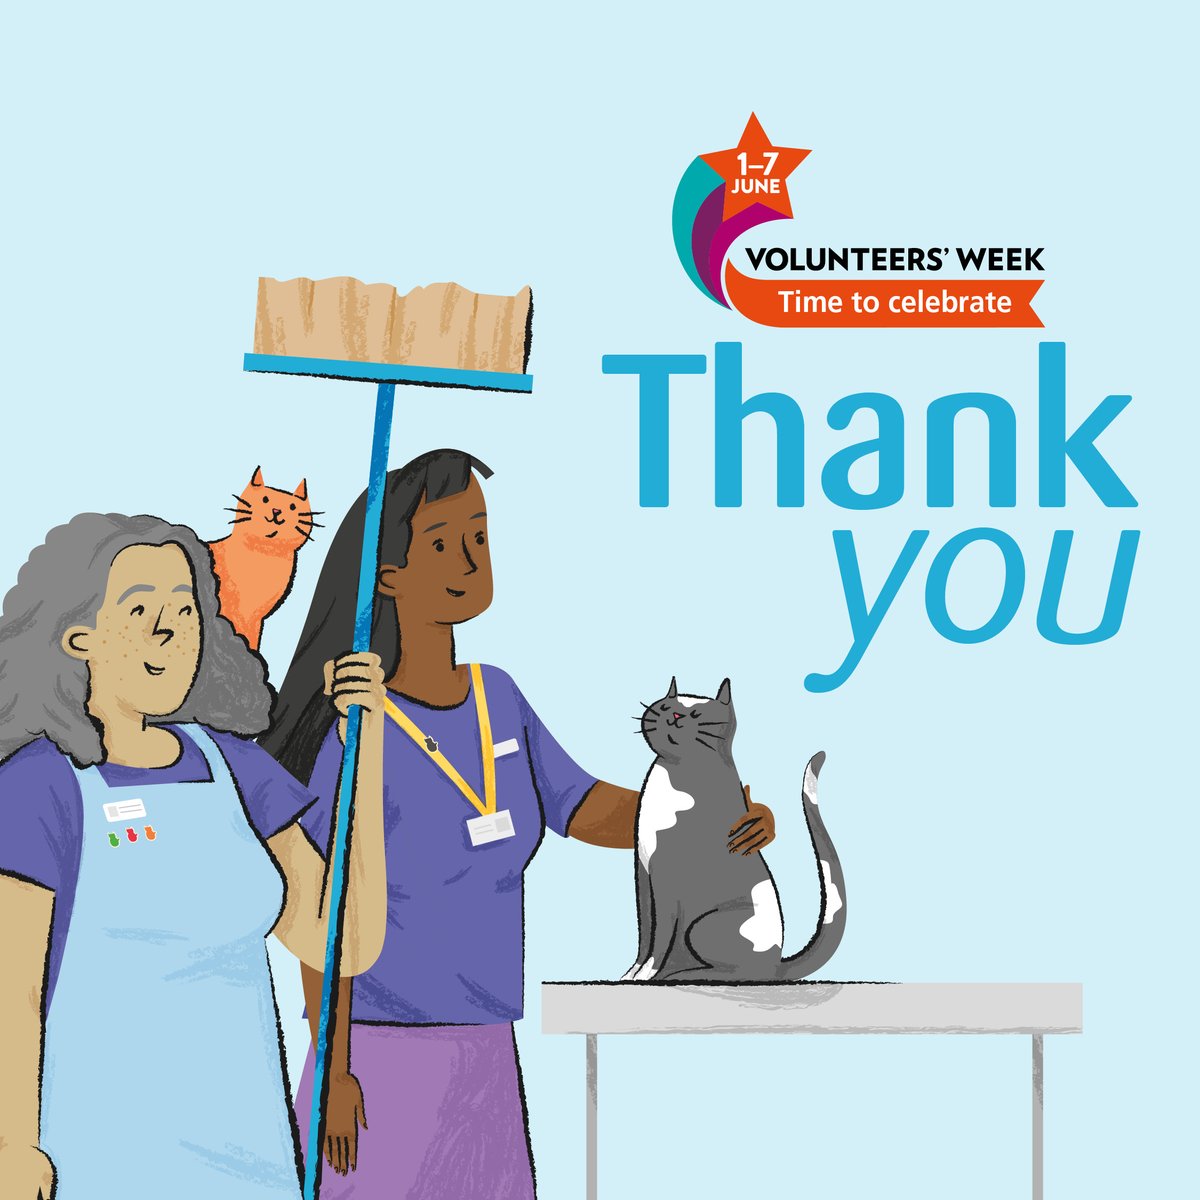 This Volunteers' Week please join me in saying a Massive Thank You to the team of dedicated, cat-loving volunteers here in Telford. From finding cats loving new homes to running our market stall, the team does it all. #ThankYou #HappyVolunteersWeek #AllForCats #Volunteering